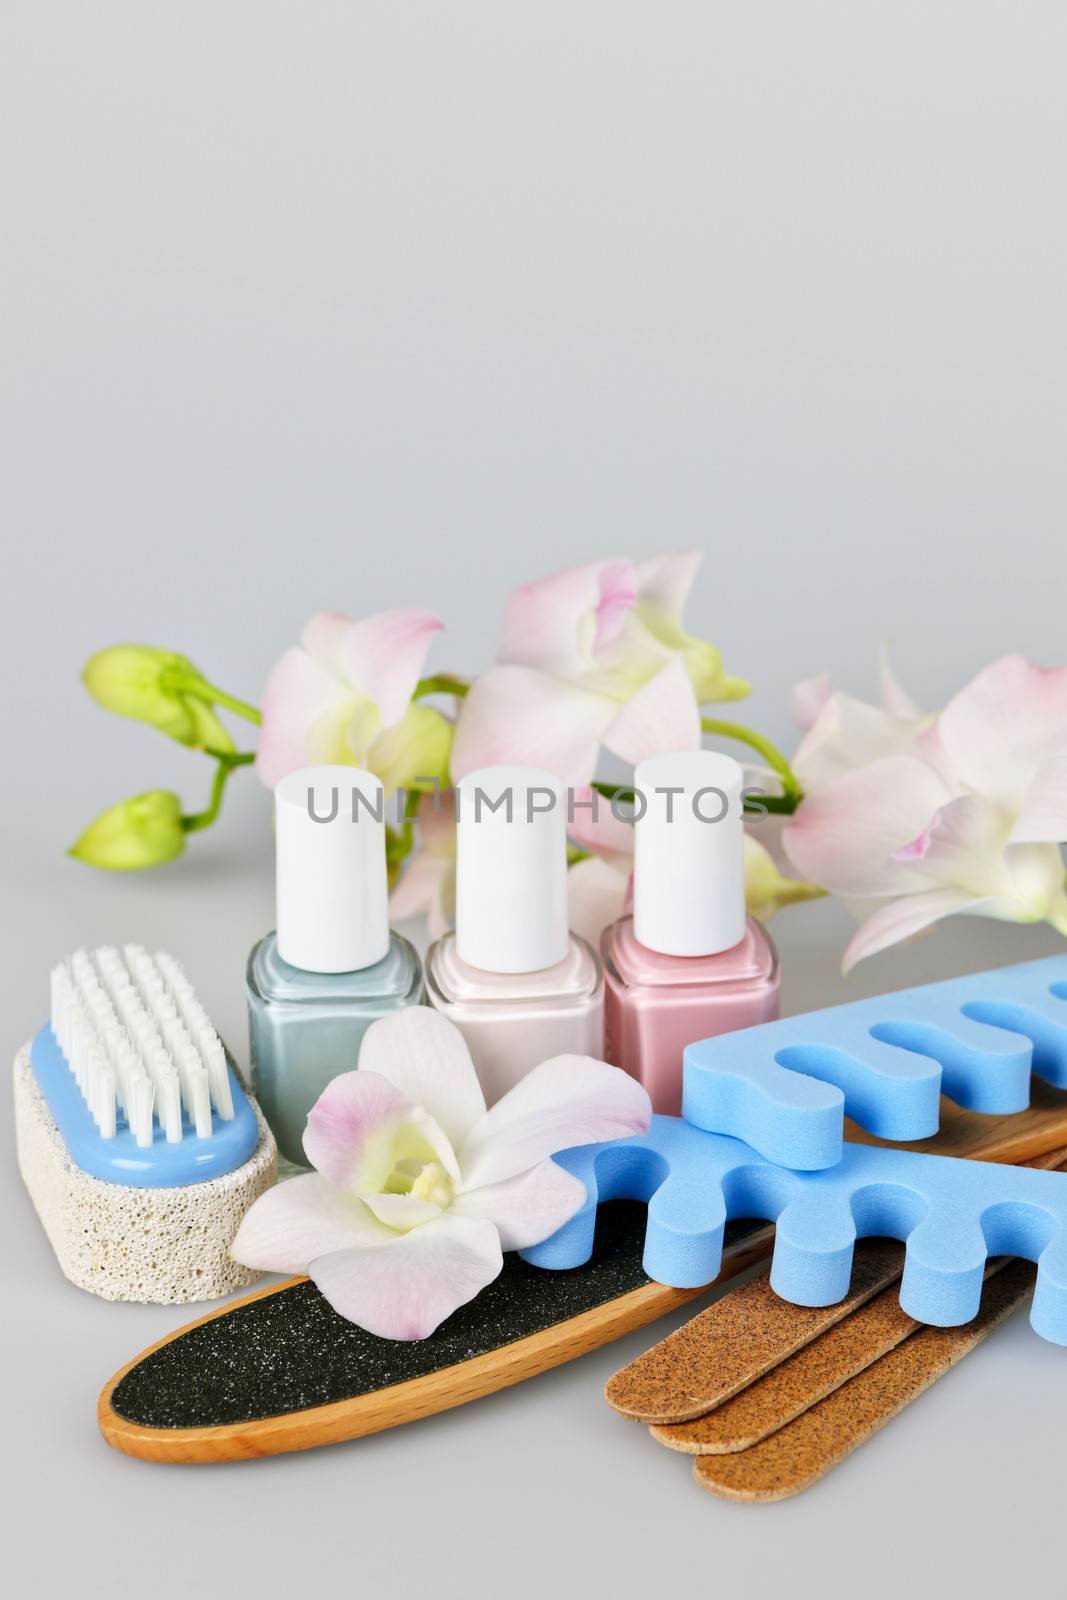 Pedicure accessories and tools with nail polish